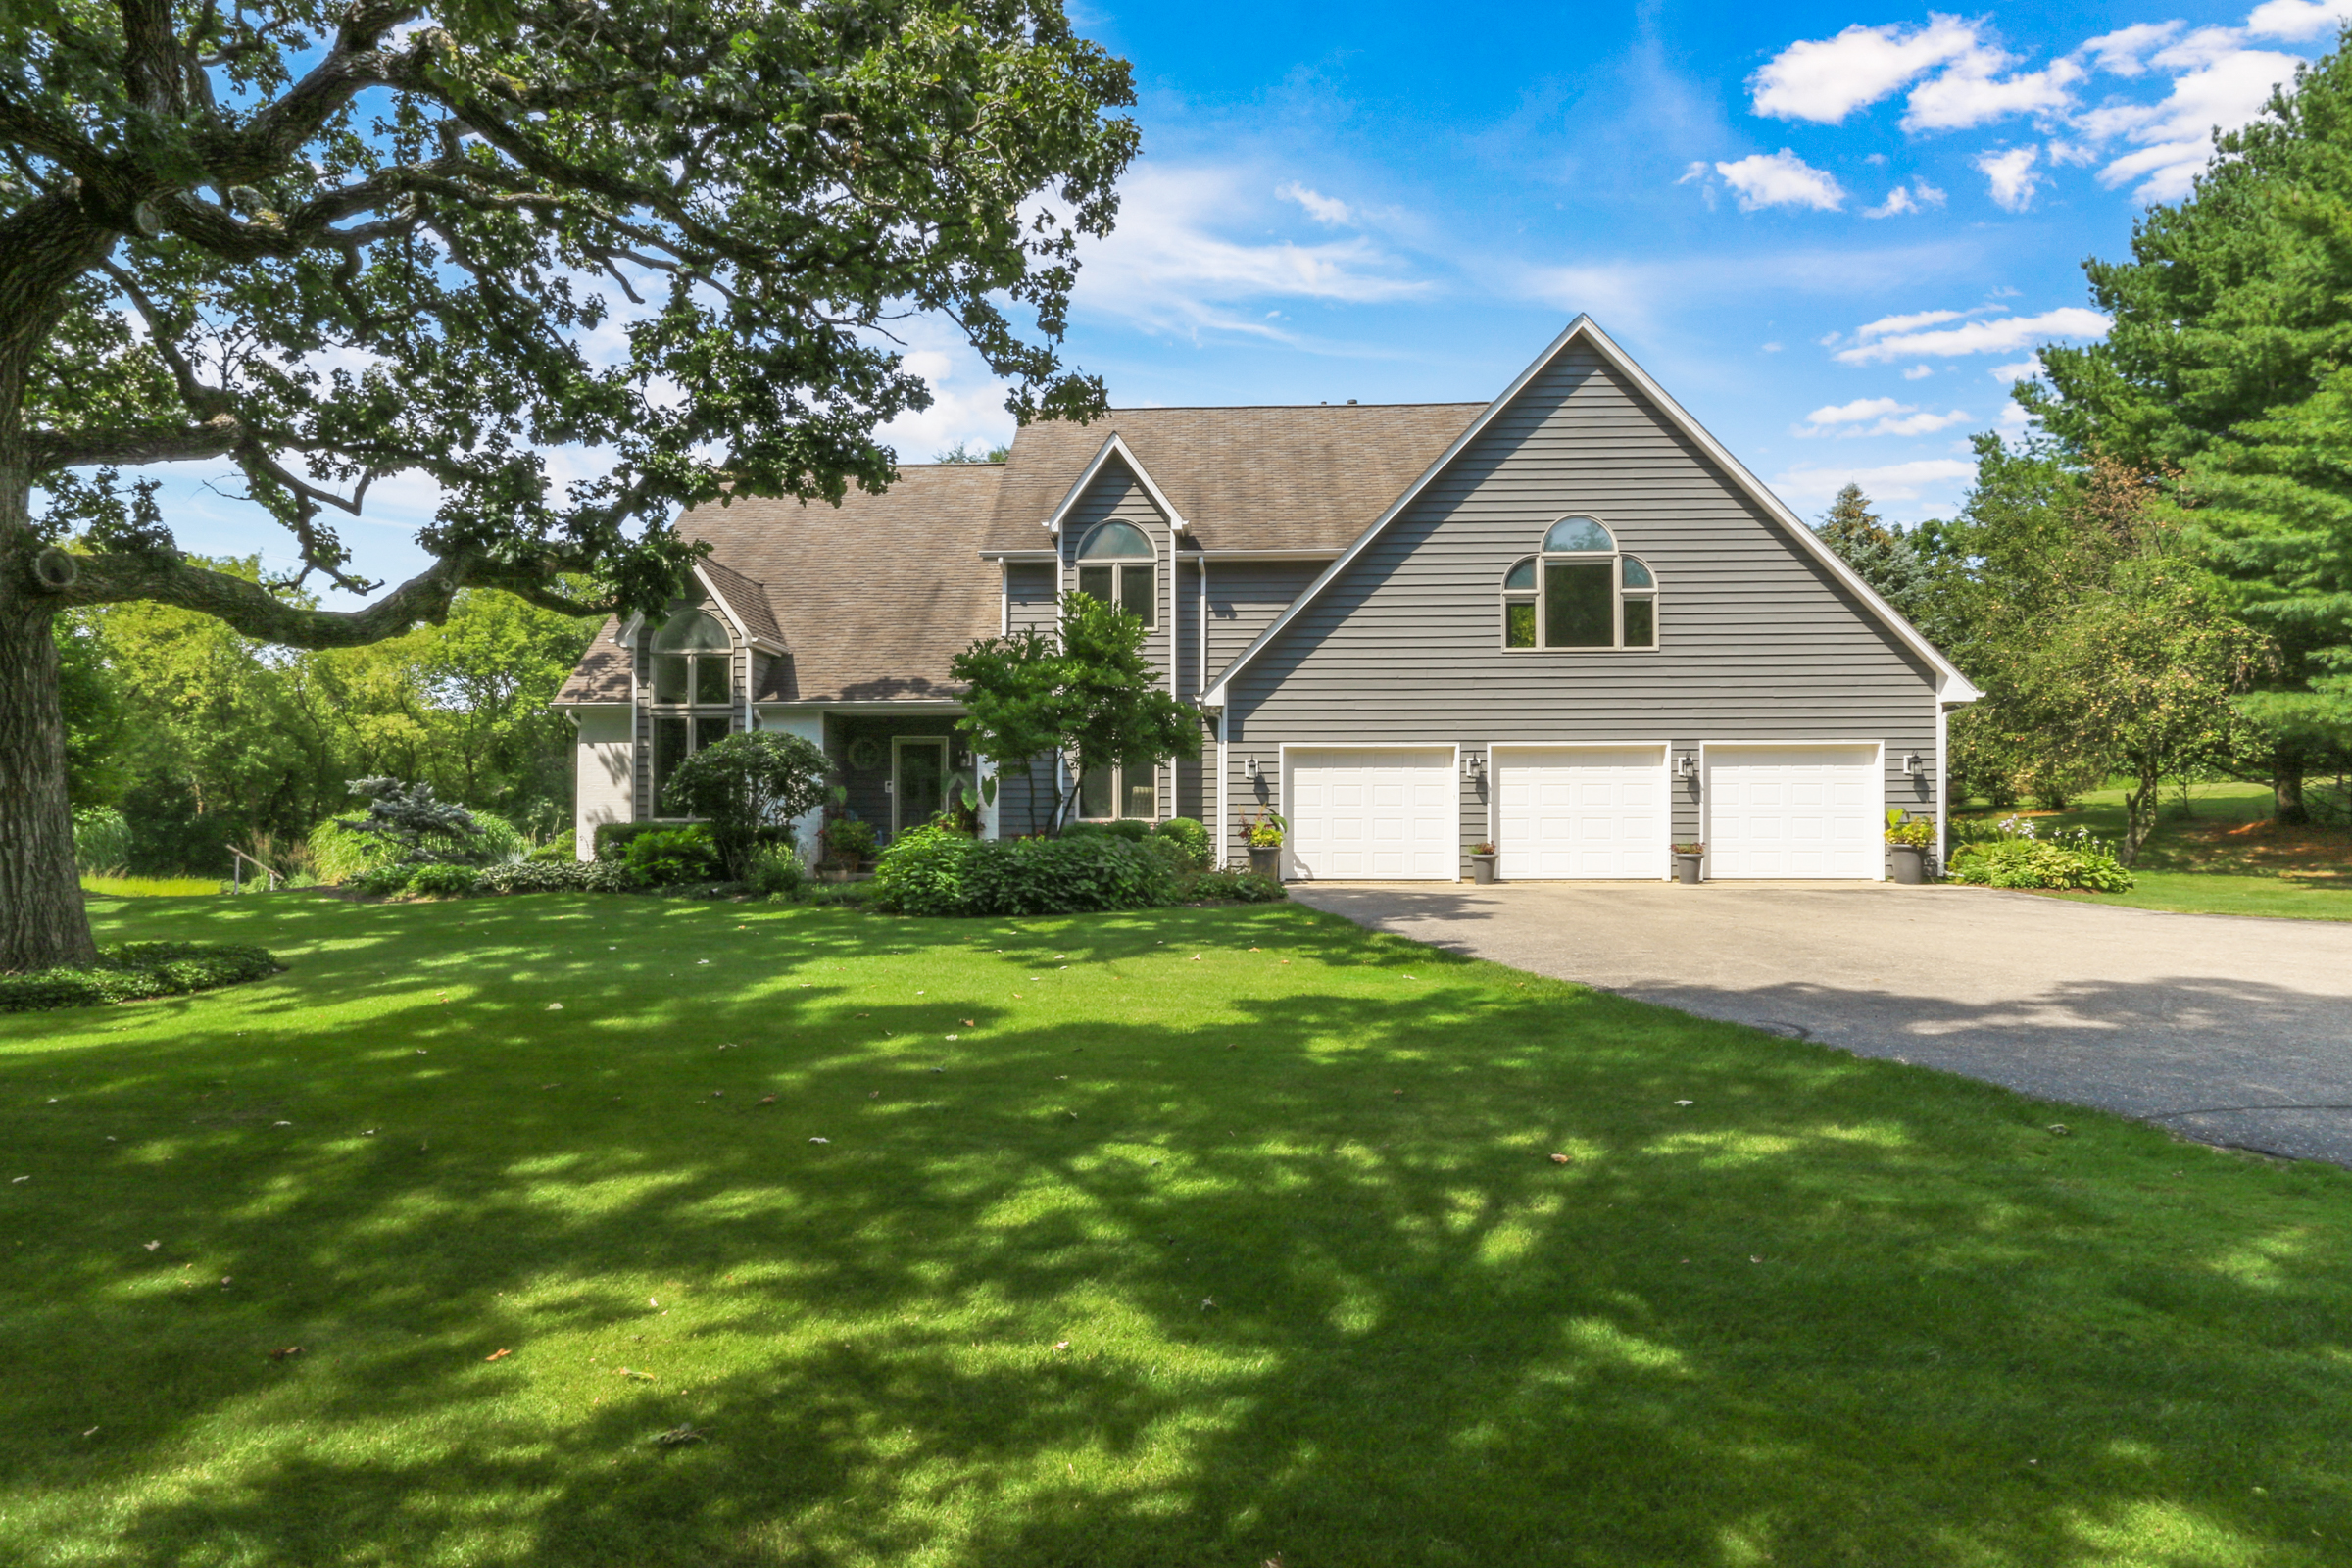 SOLD! 4BR, 4.5BA Home Minutes from Lake Geneva | 2380 Partridge Woods Ct, Burlington WI